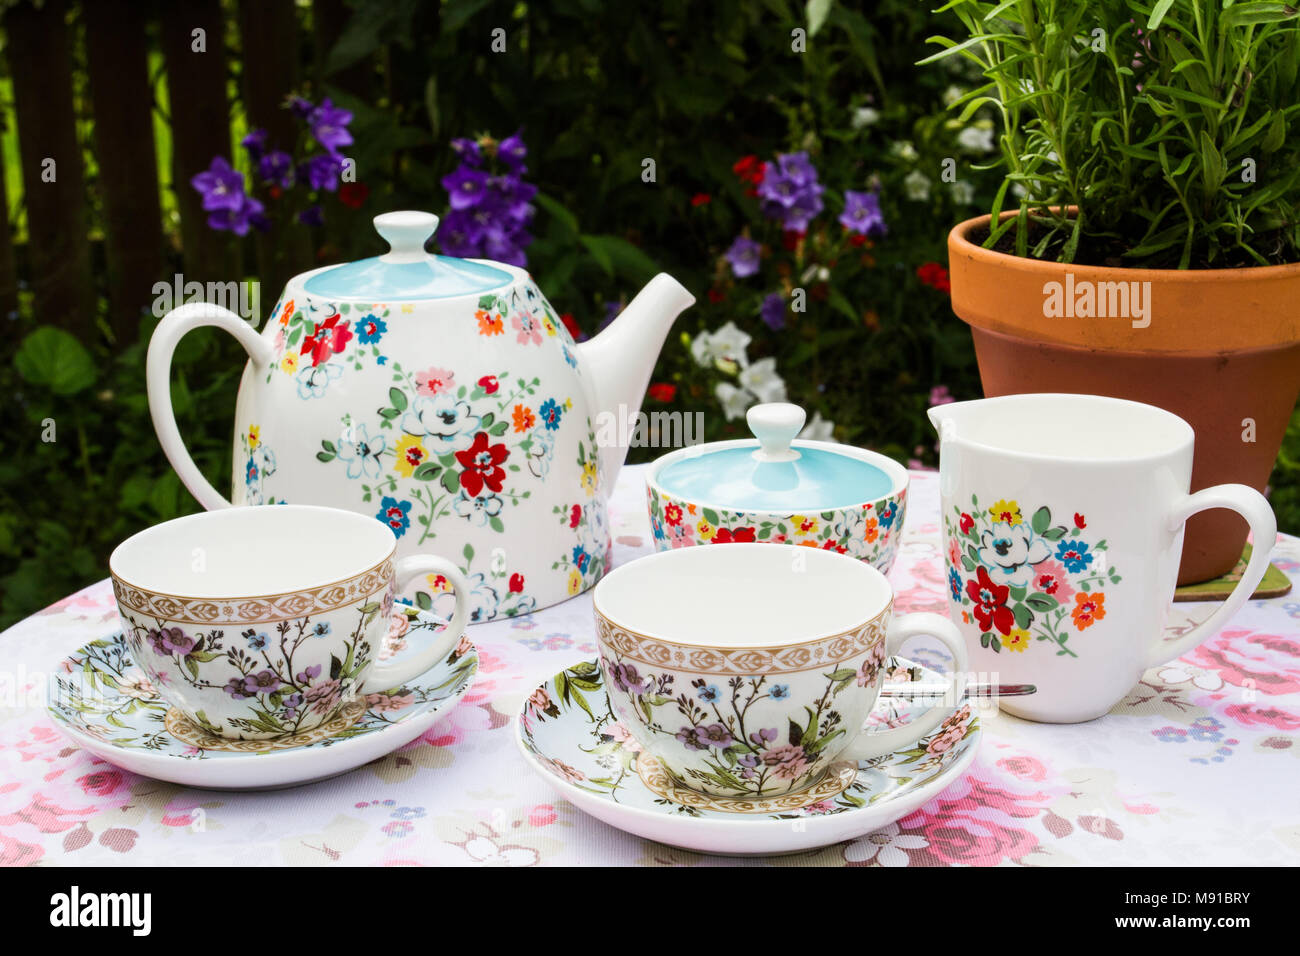 A floral tea service with teapot, cups and saucers and milk jug on a picnic table in an English country garden ready for afternoon tea. Stock Photo